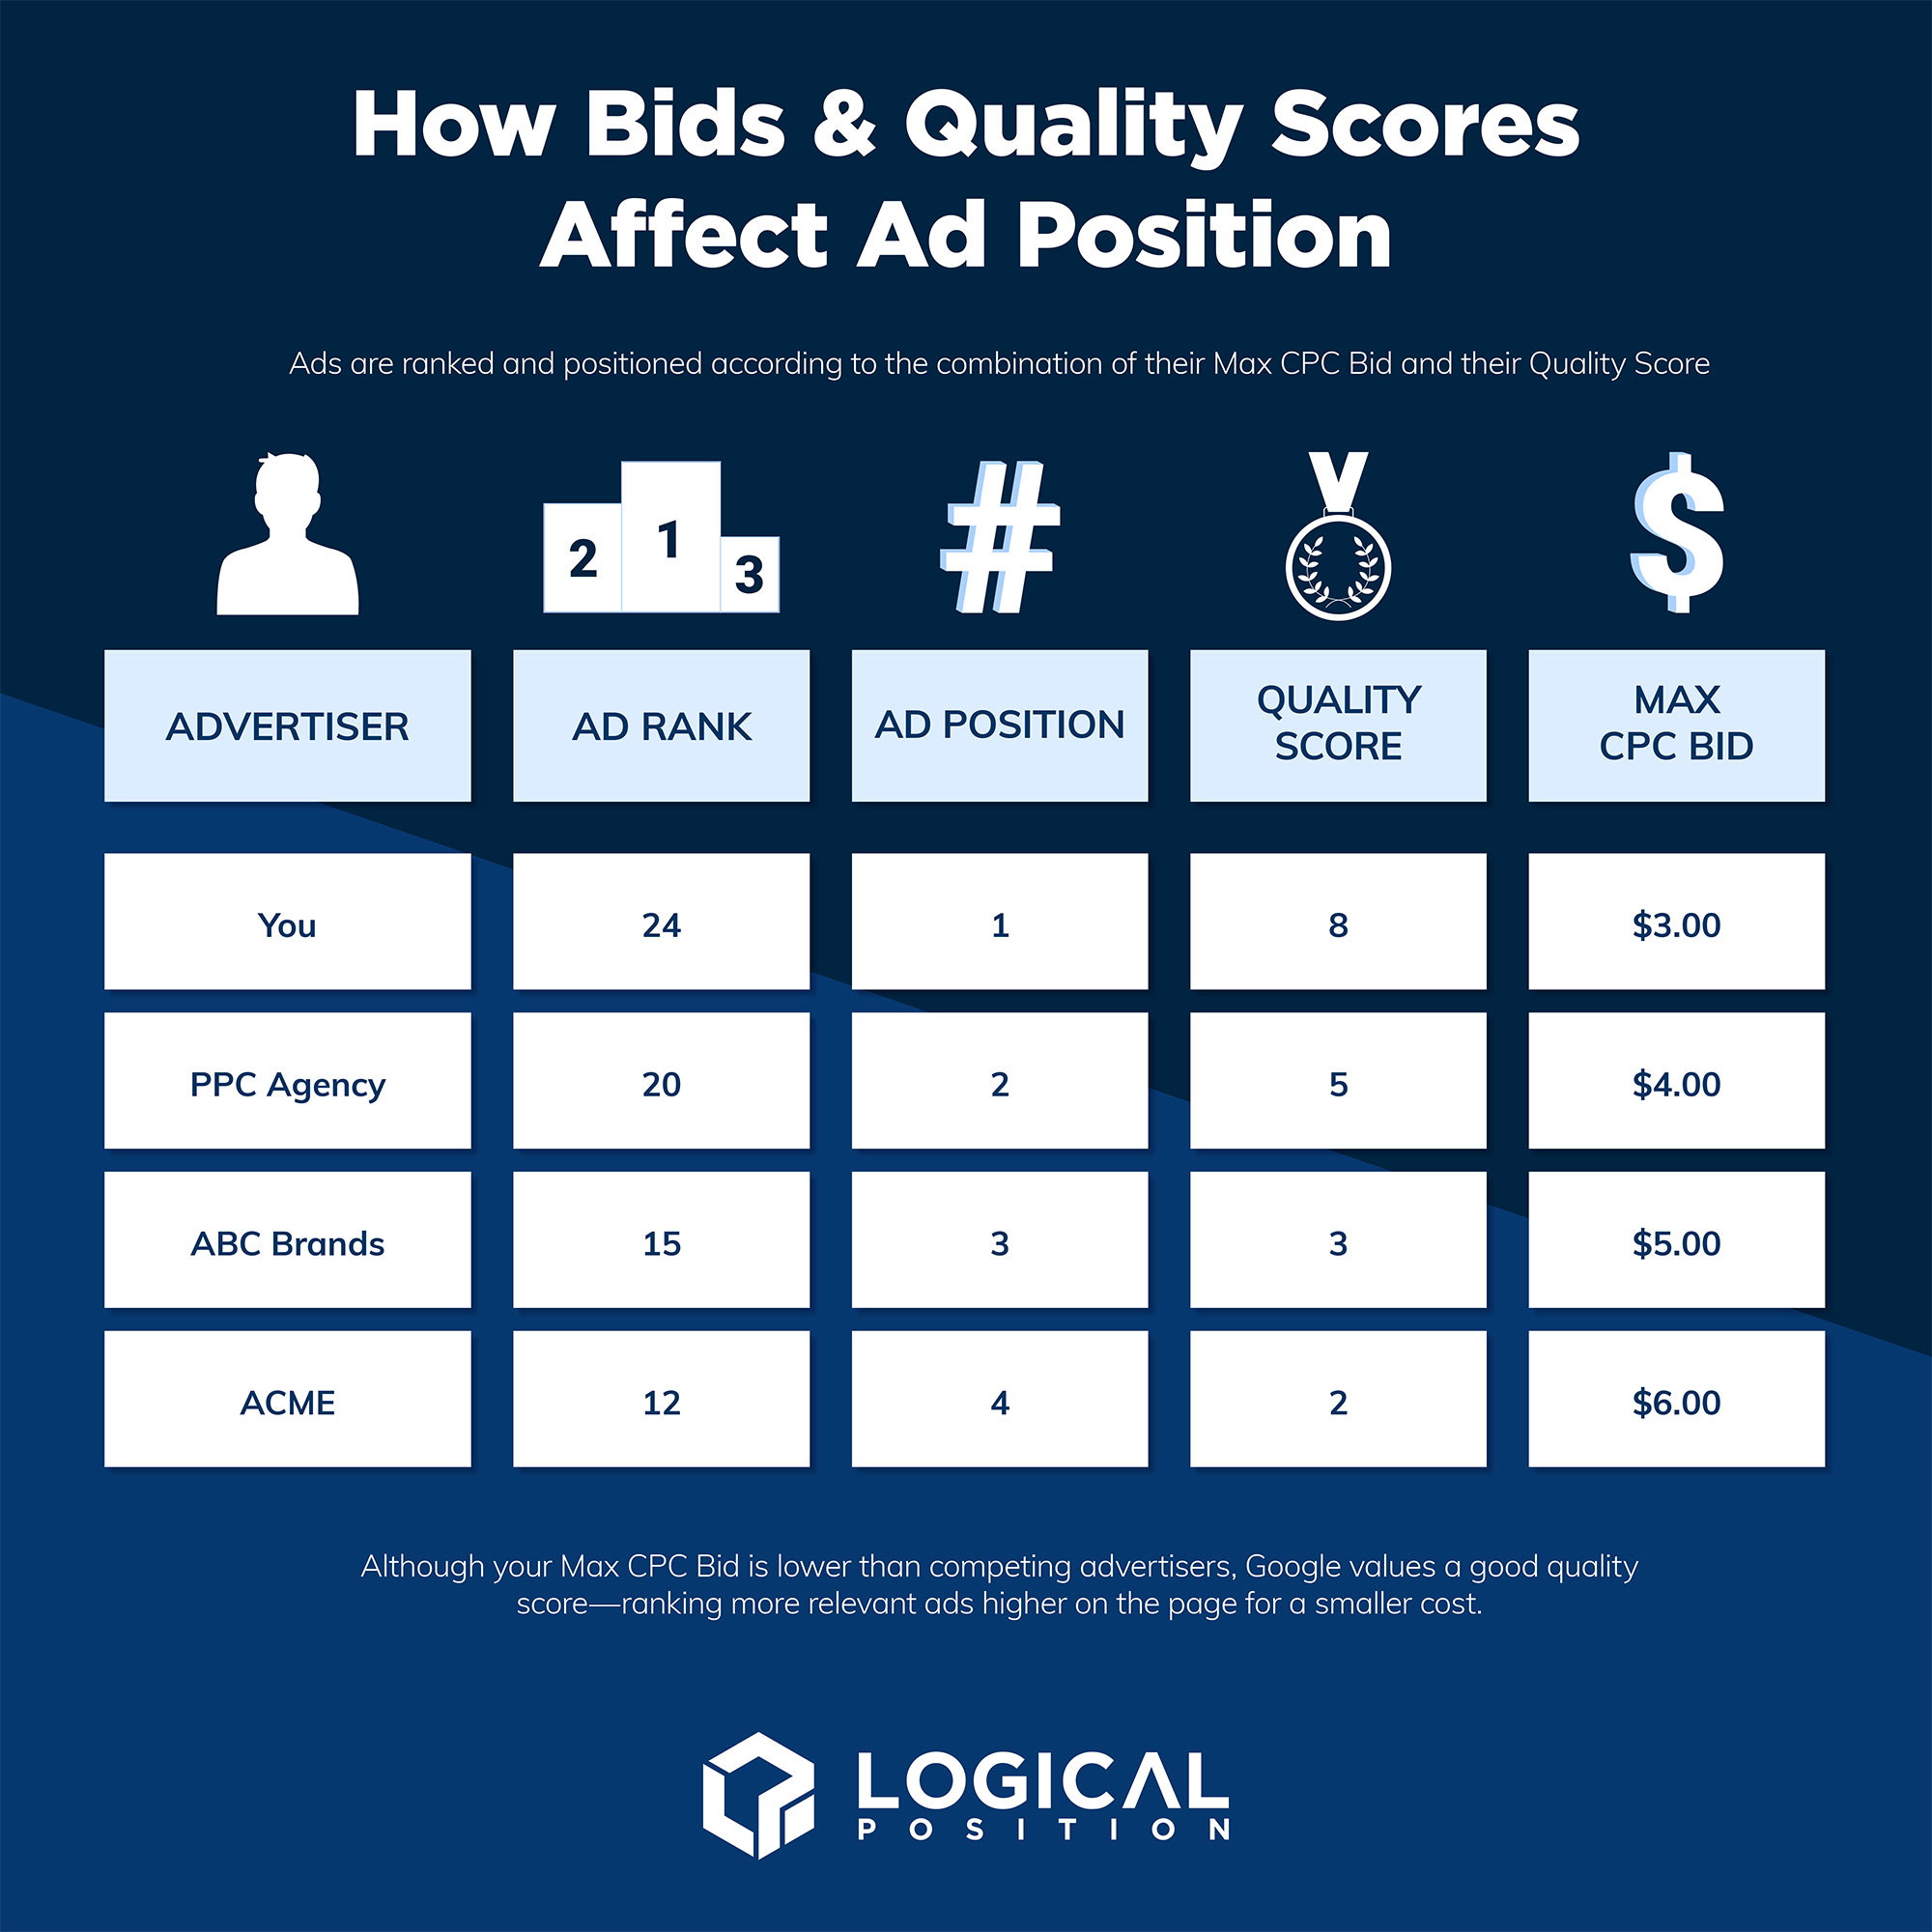 How Bids & Quality Score Affect Ad Position graphic